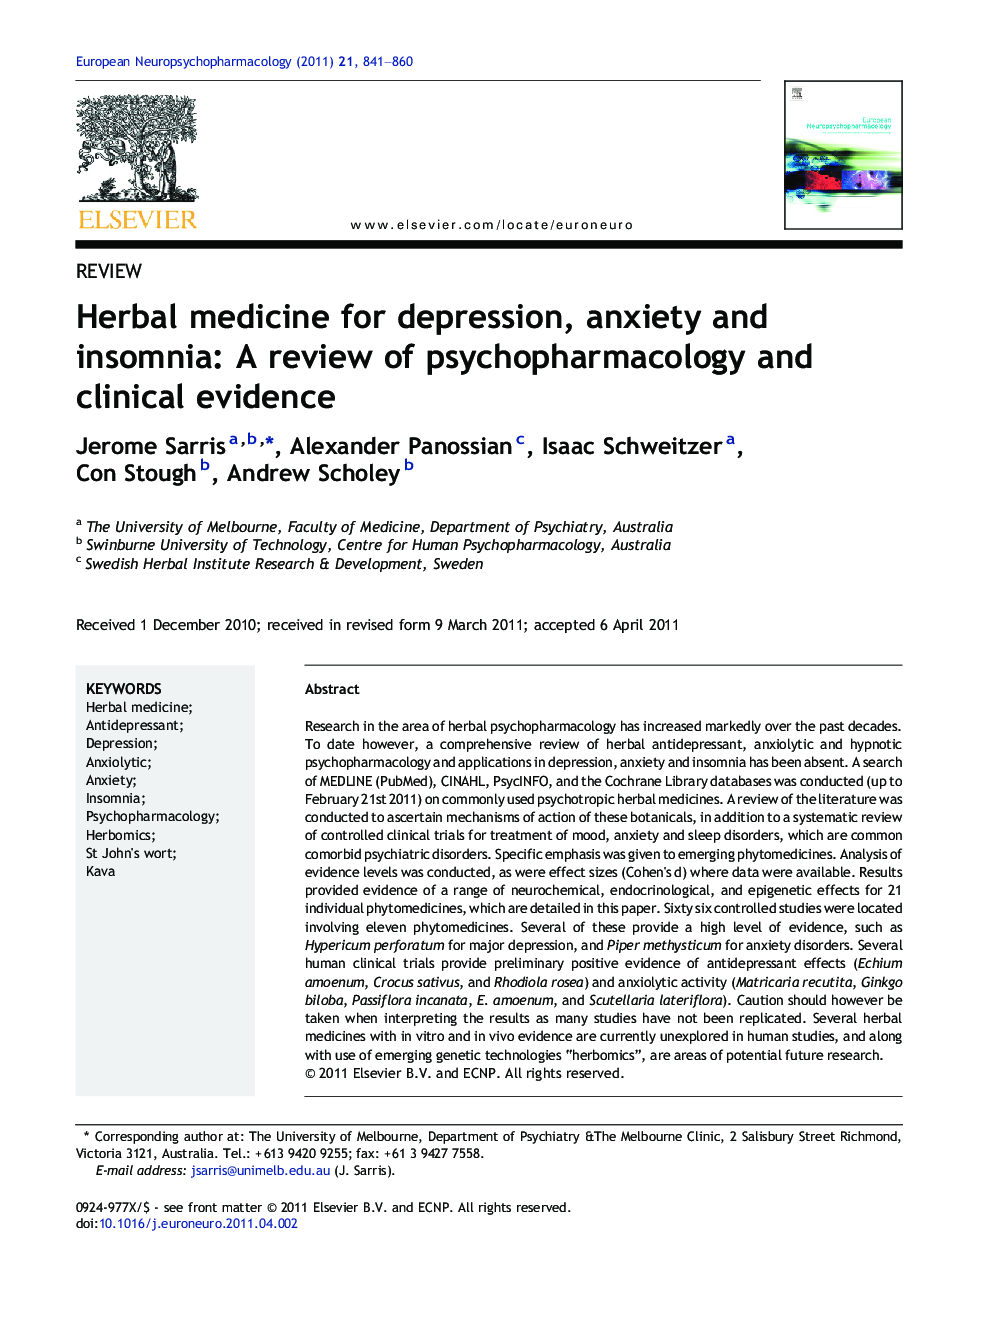 Herbal medicine for depression, anxiety and insomnia: A review of psychopharmacology and clinical evidence